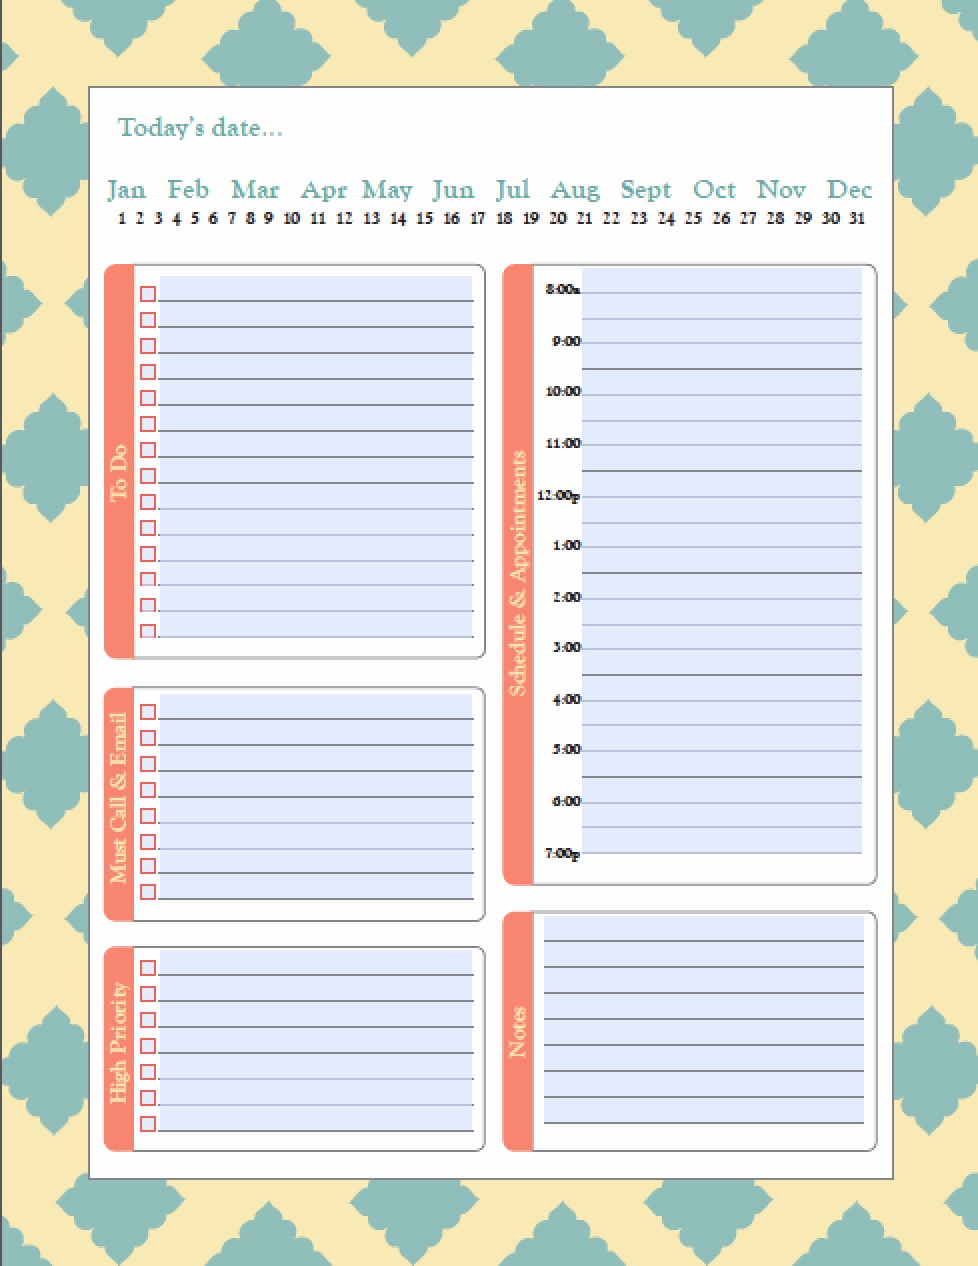 Daily Planner Template Word Lovely Download Daily Schedule Planner Templates Pdf